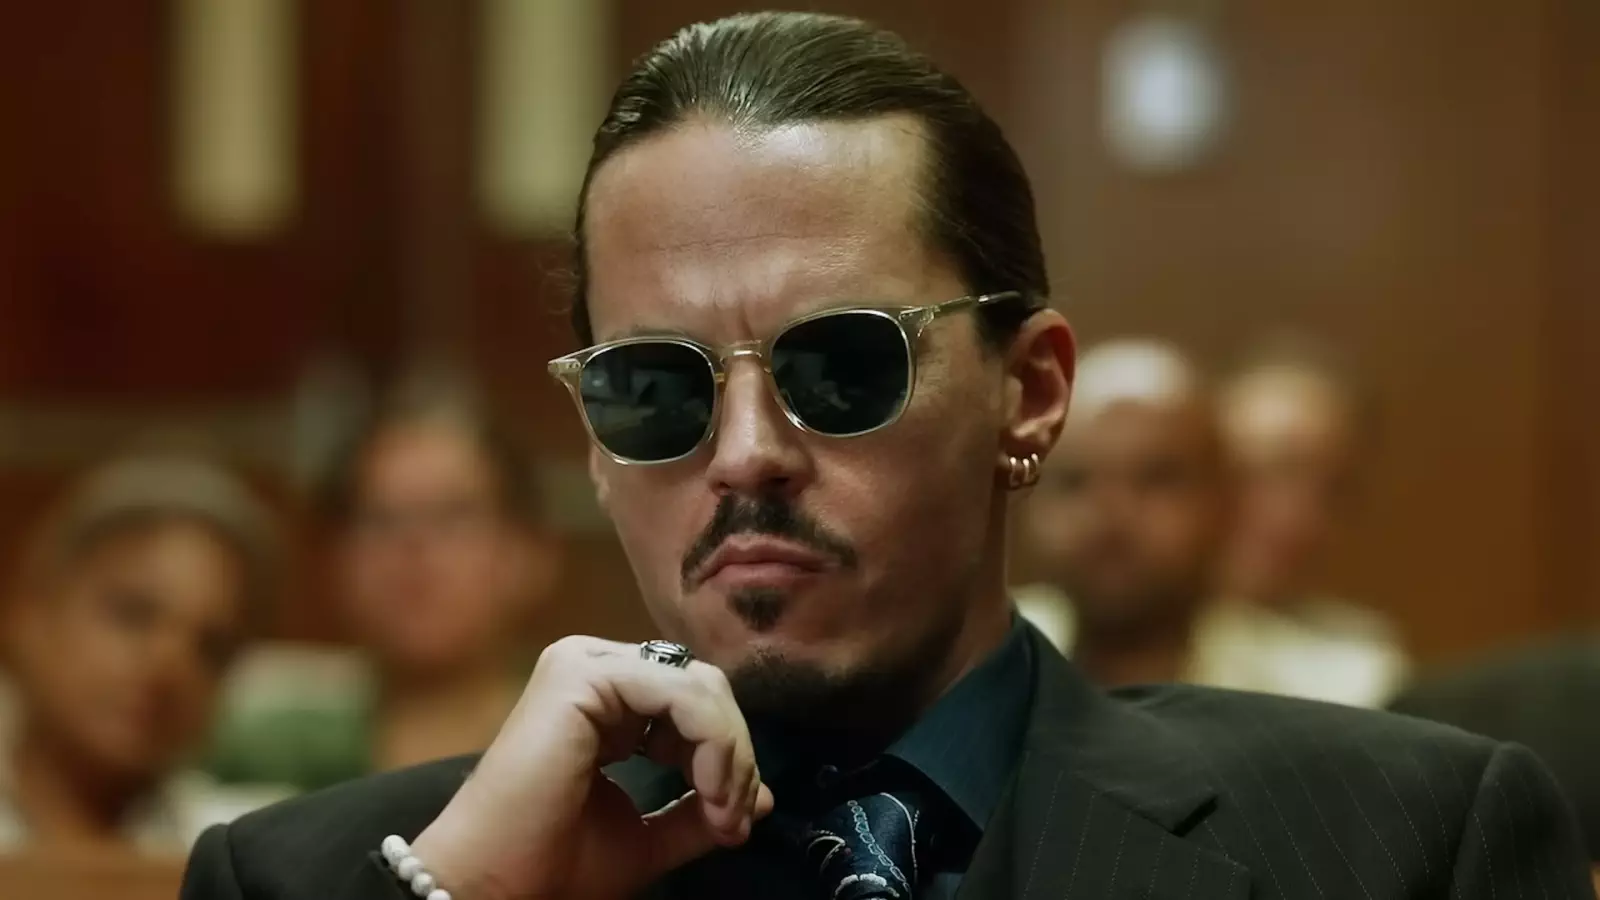 Trailer for Tubi's Johnny Depp and Amber Heard movie Hot Take: The Depp/Heard Trial